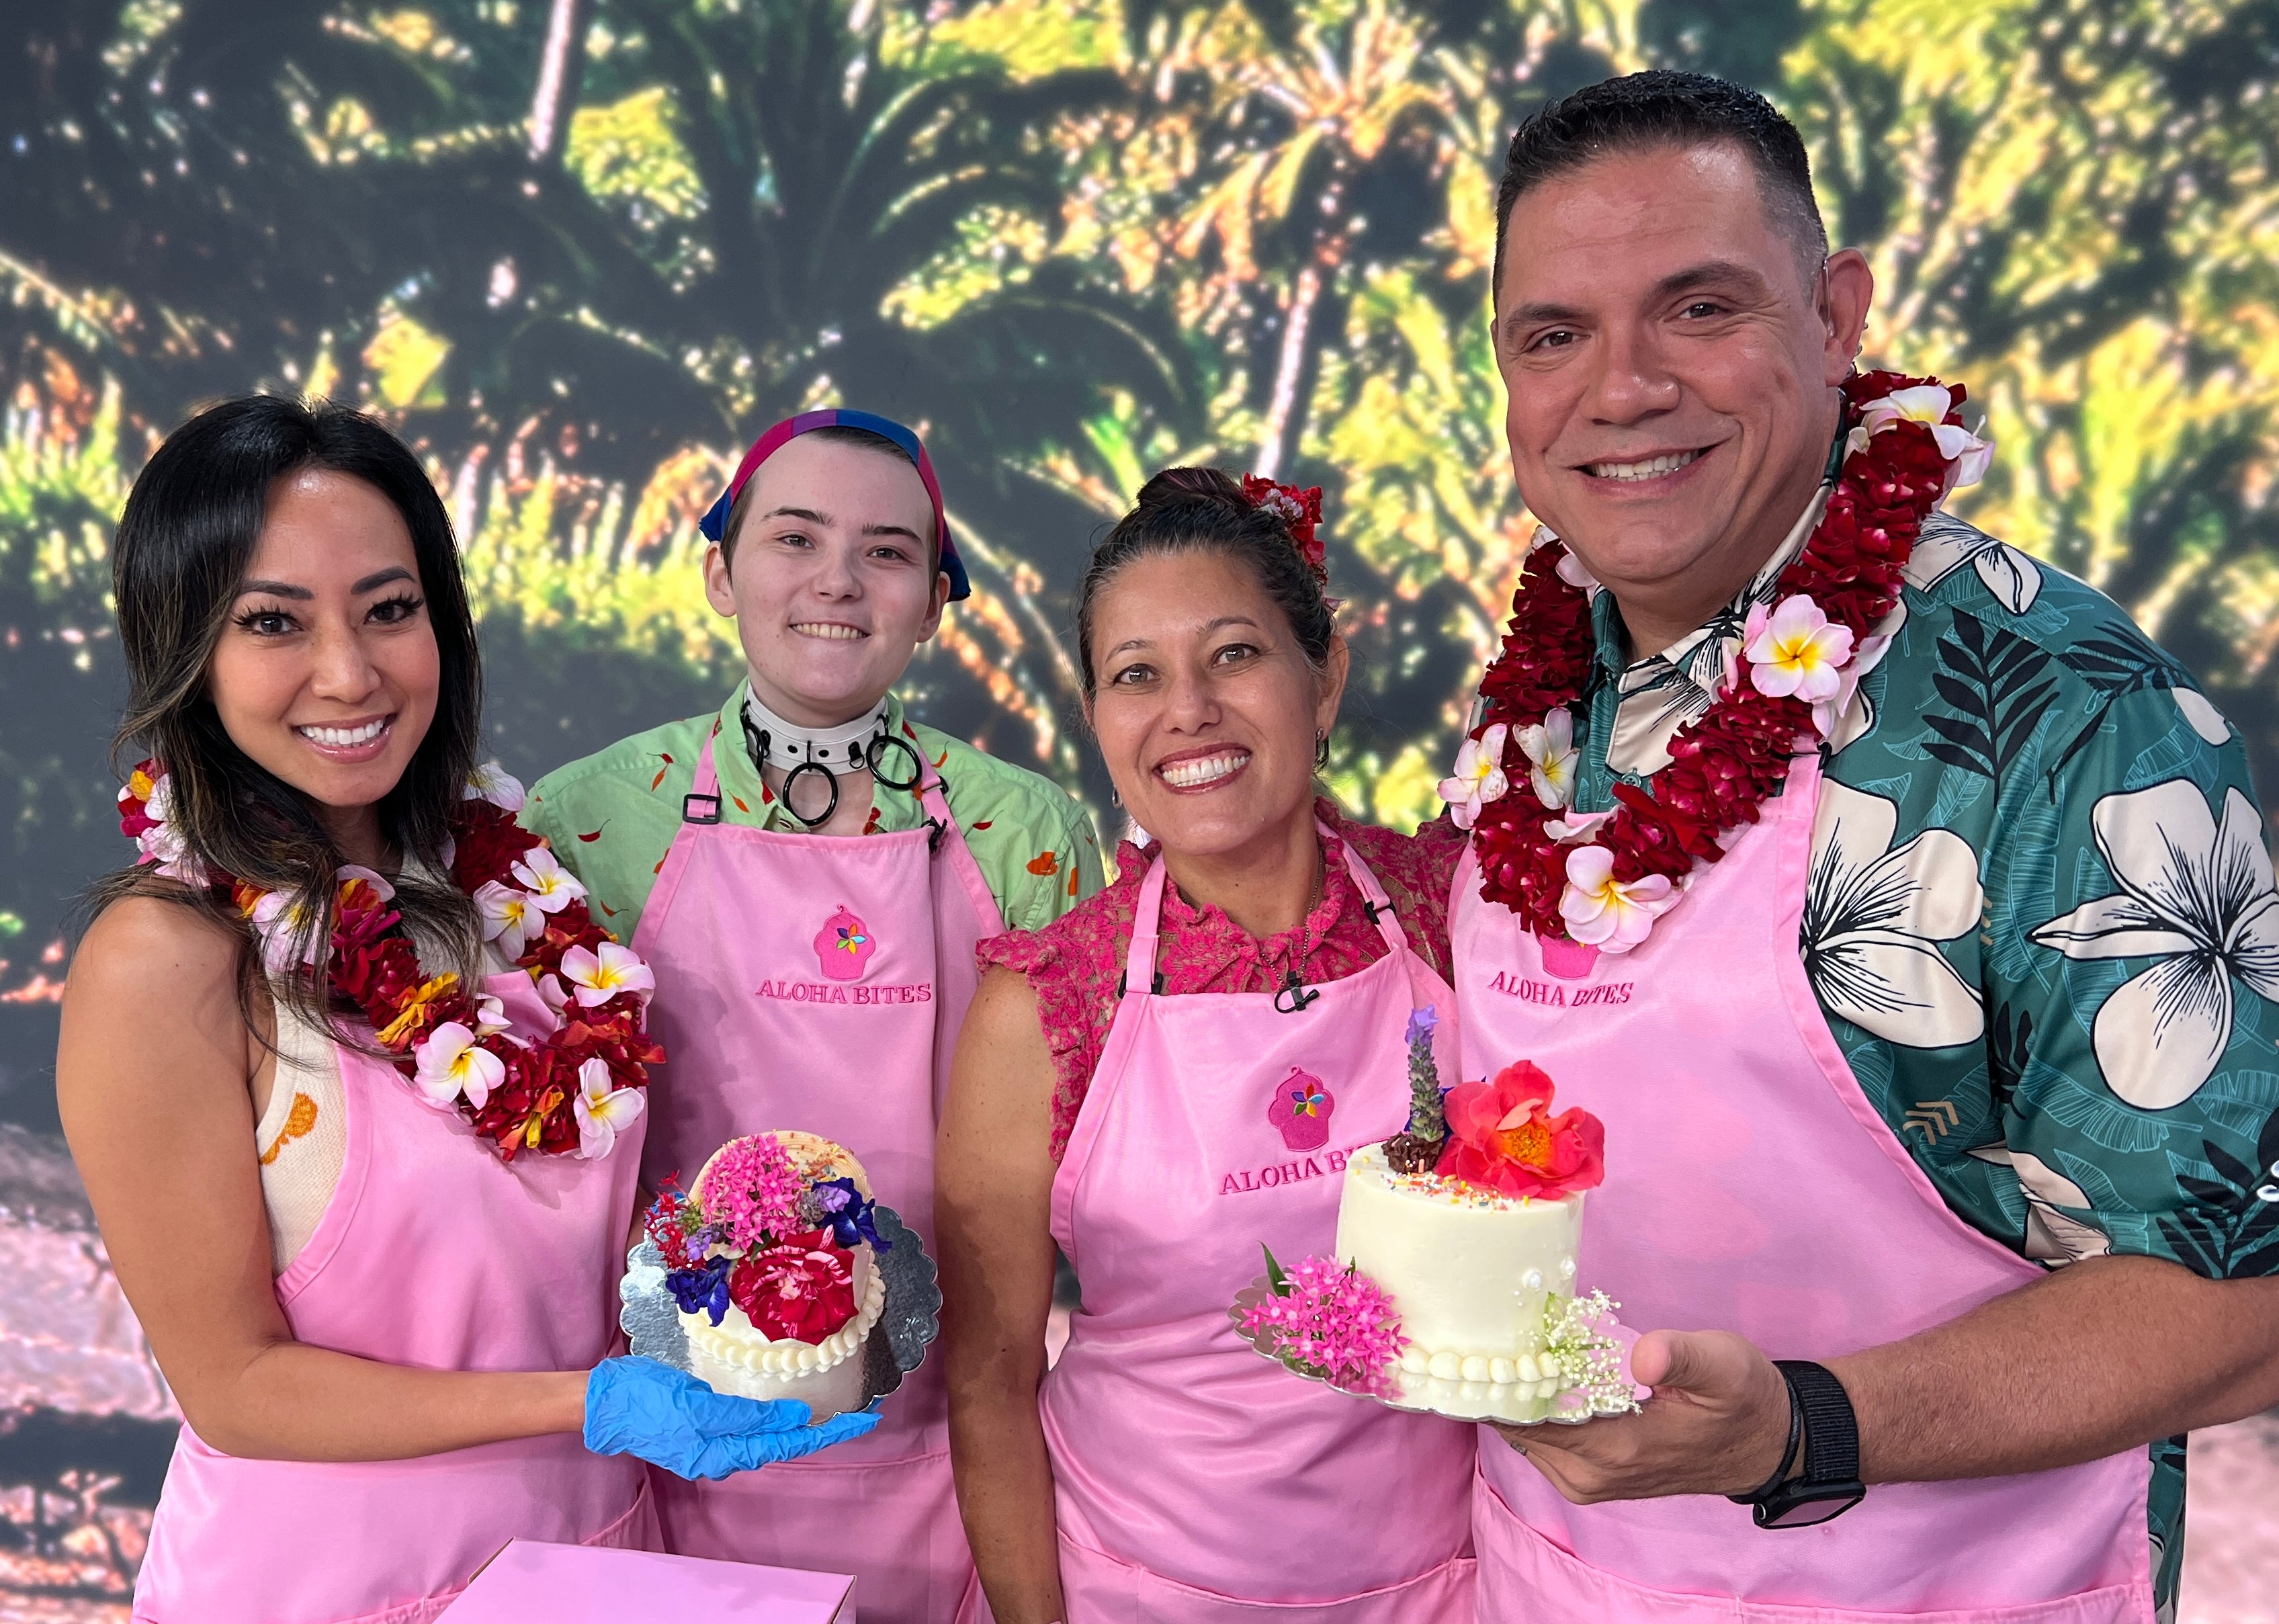 Load video: Aloha Bites decorates cakes and cupcakes on the Living 808 Hawaii Show